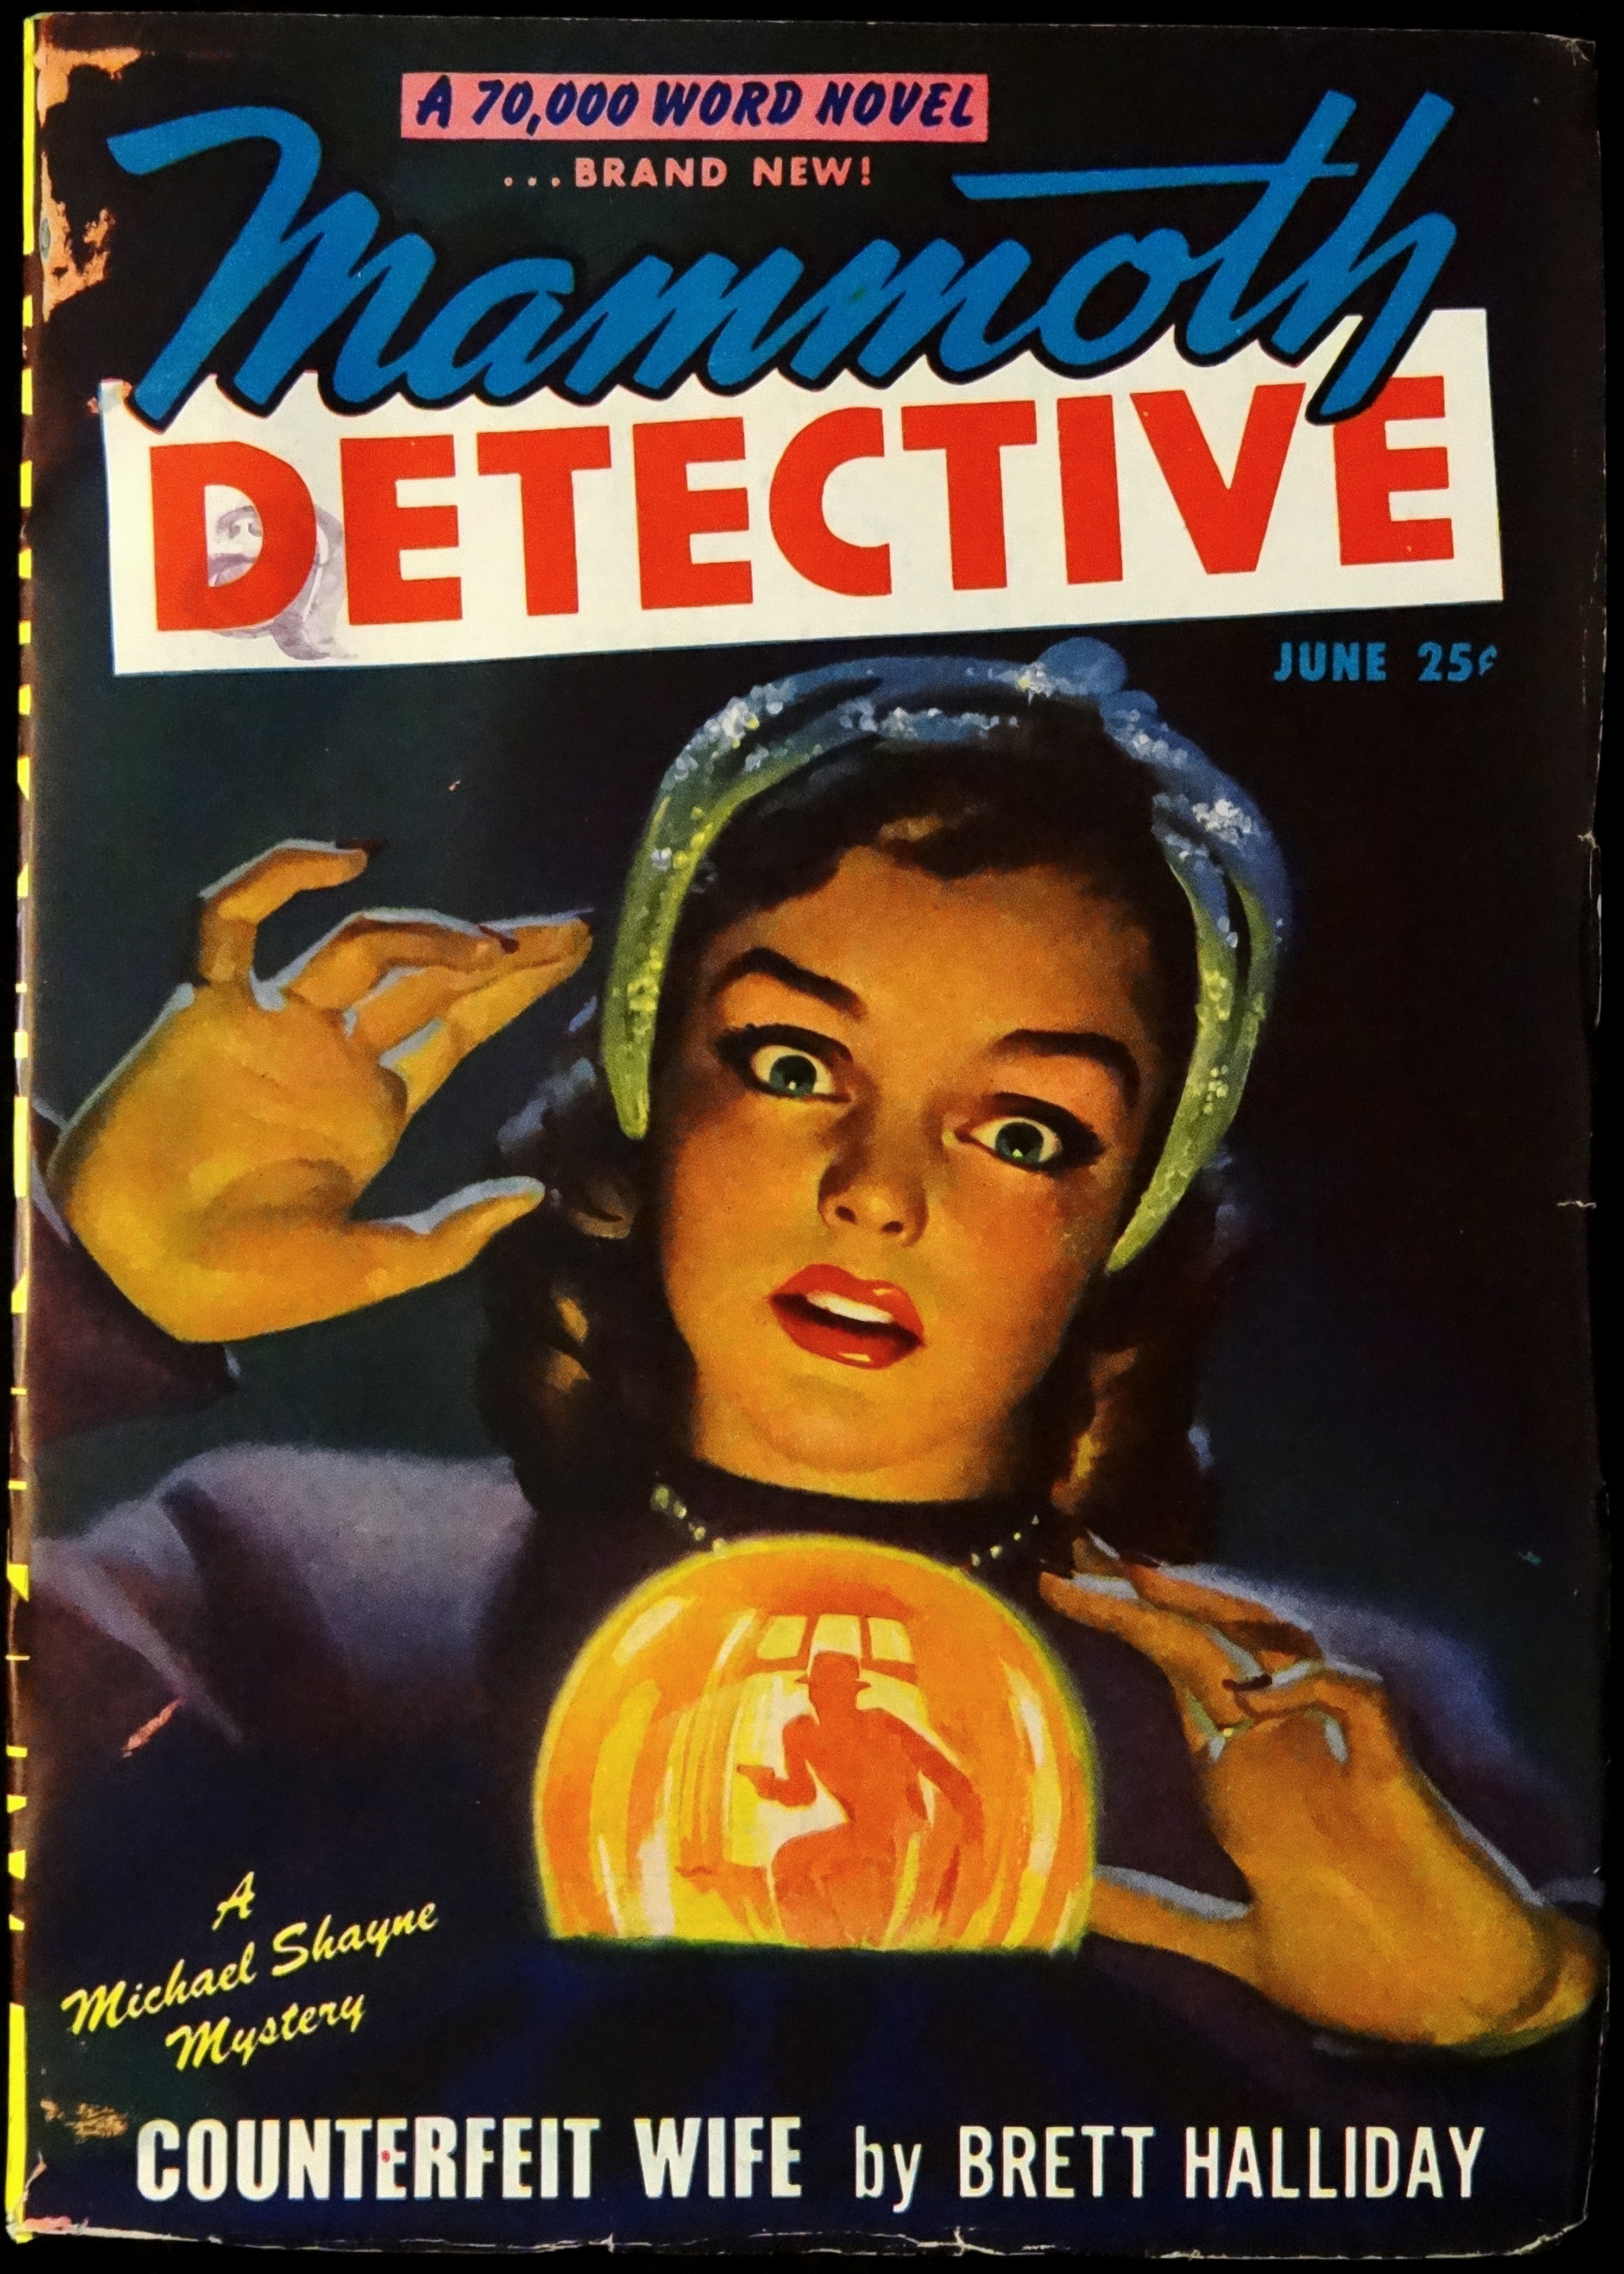 Mammoth Detective Vol. 6, No. 6 (June, 1947). Cover Art by H. W. McCauley